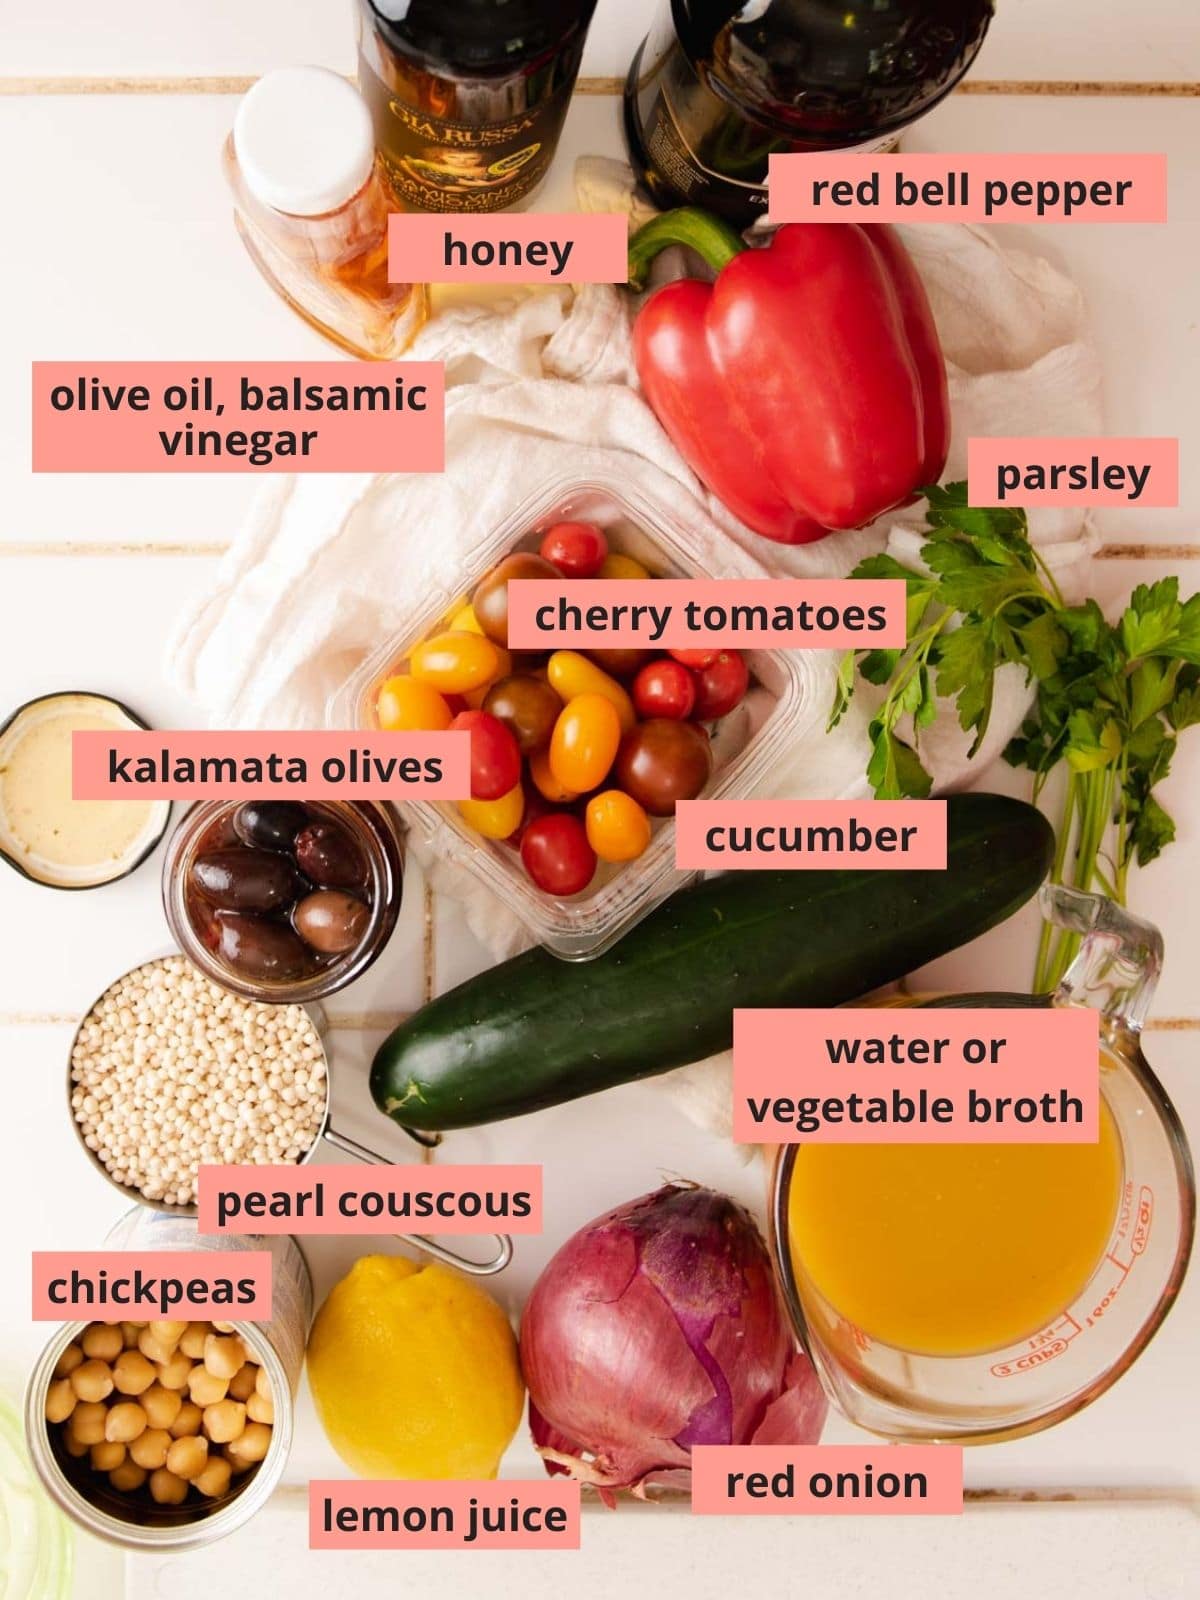 Labeled ingredients used to make couscous salad.